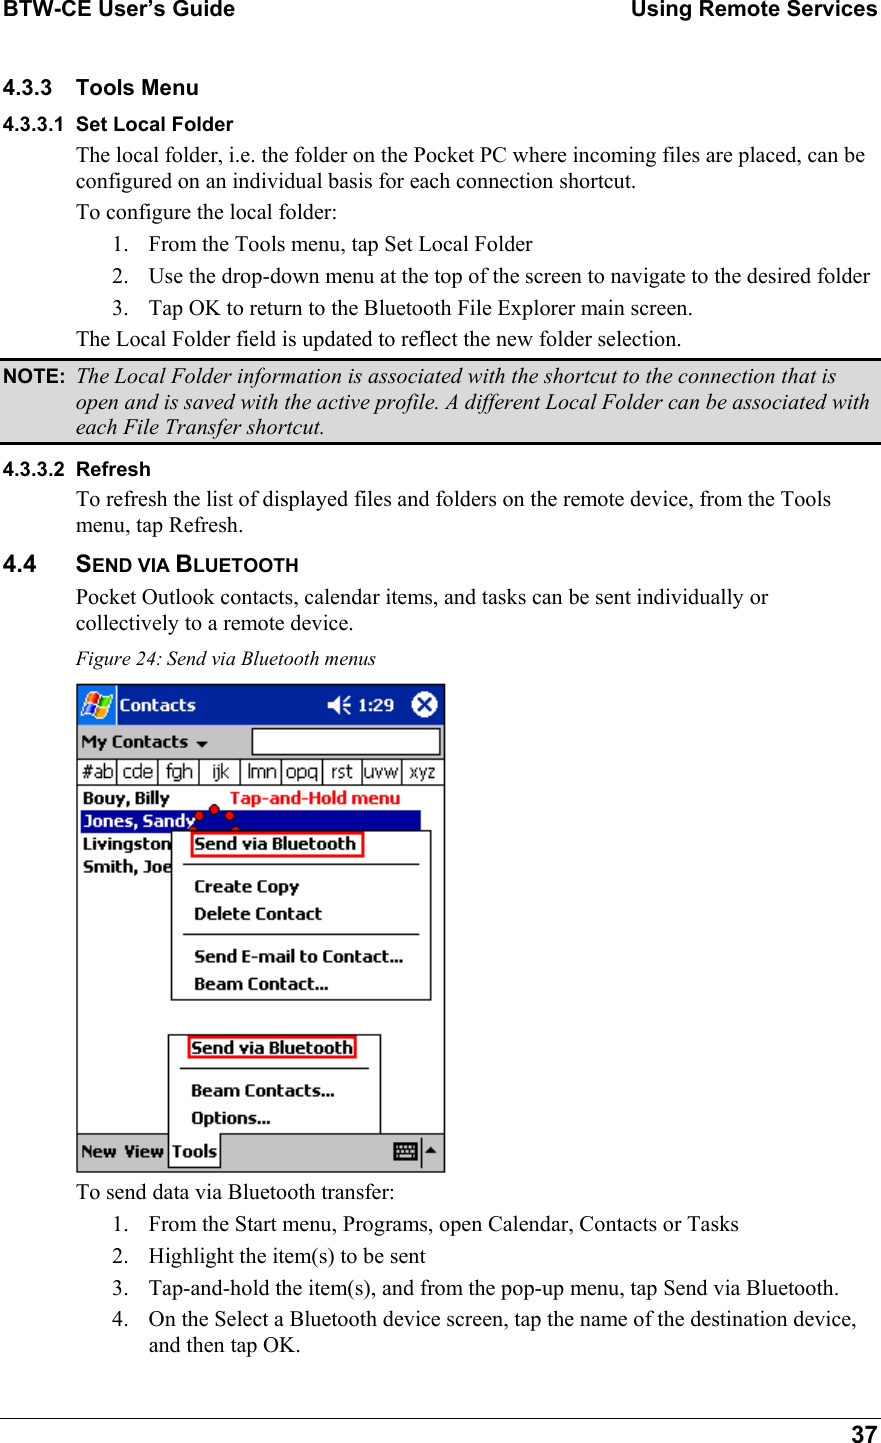 BTW-CE User’s Guide    Using Remote Services  37 4.3.3 Tools Menu 4.3.3.1 Set Local Folder The local folder, i.e. the folder on the Pocket PC where incoming files are placed, can be configured on an individual basis for each connection shortcut. To configure the local folder: 1.  From the Tools menu, tap Set Local Folder 2.  Use the drop-down menu at the top of the screen to navigate to the desired folder 3.  Tap OK to return to the Bluetooth File Explorer main screen. The Local Folder field is updated to reflect the new folder selection. NOTE:  The Local Folder information is associated with the shortcut to the connection that is open and is saved with the active profile. A different Local Folder can be associated with each File Transfer shortcut. 4.3.3.2 Refresh To refresh the list of displayed files and folders on the remote device, from the Tools menu, tap Refresh. 4.4 SEND VIA BLUETOOTH Pocket Outlook contacts, calendar items, and tasks can be sent individually or collectively to a remote device. Figure 24: Send via Bluetooth menus  To send data via Bluetooth transfer: 1.  From the Start menu, Programs, open Calendar, Contacts or Tasks 2.  Highlight the item(s) to be sent 3.  Tap-and-hold the item(s), and from the pop-up menu, tap Send via Bluetooth. 4.  On the Select a Bluetooth device screen, tap the name of the destination device, and then tap OK. 